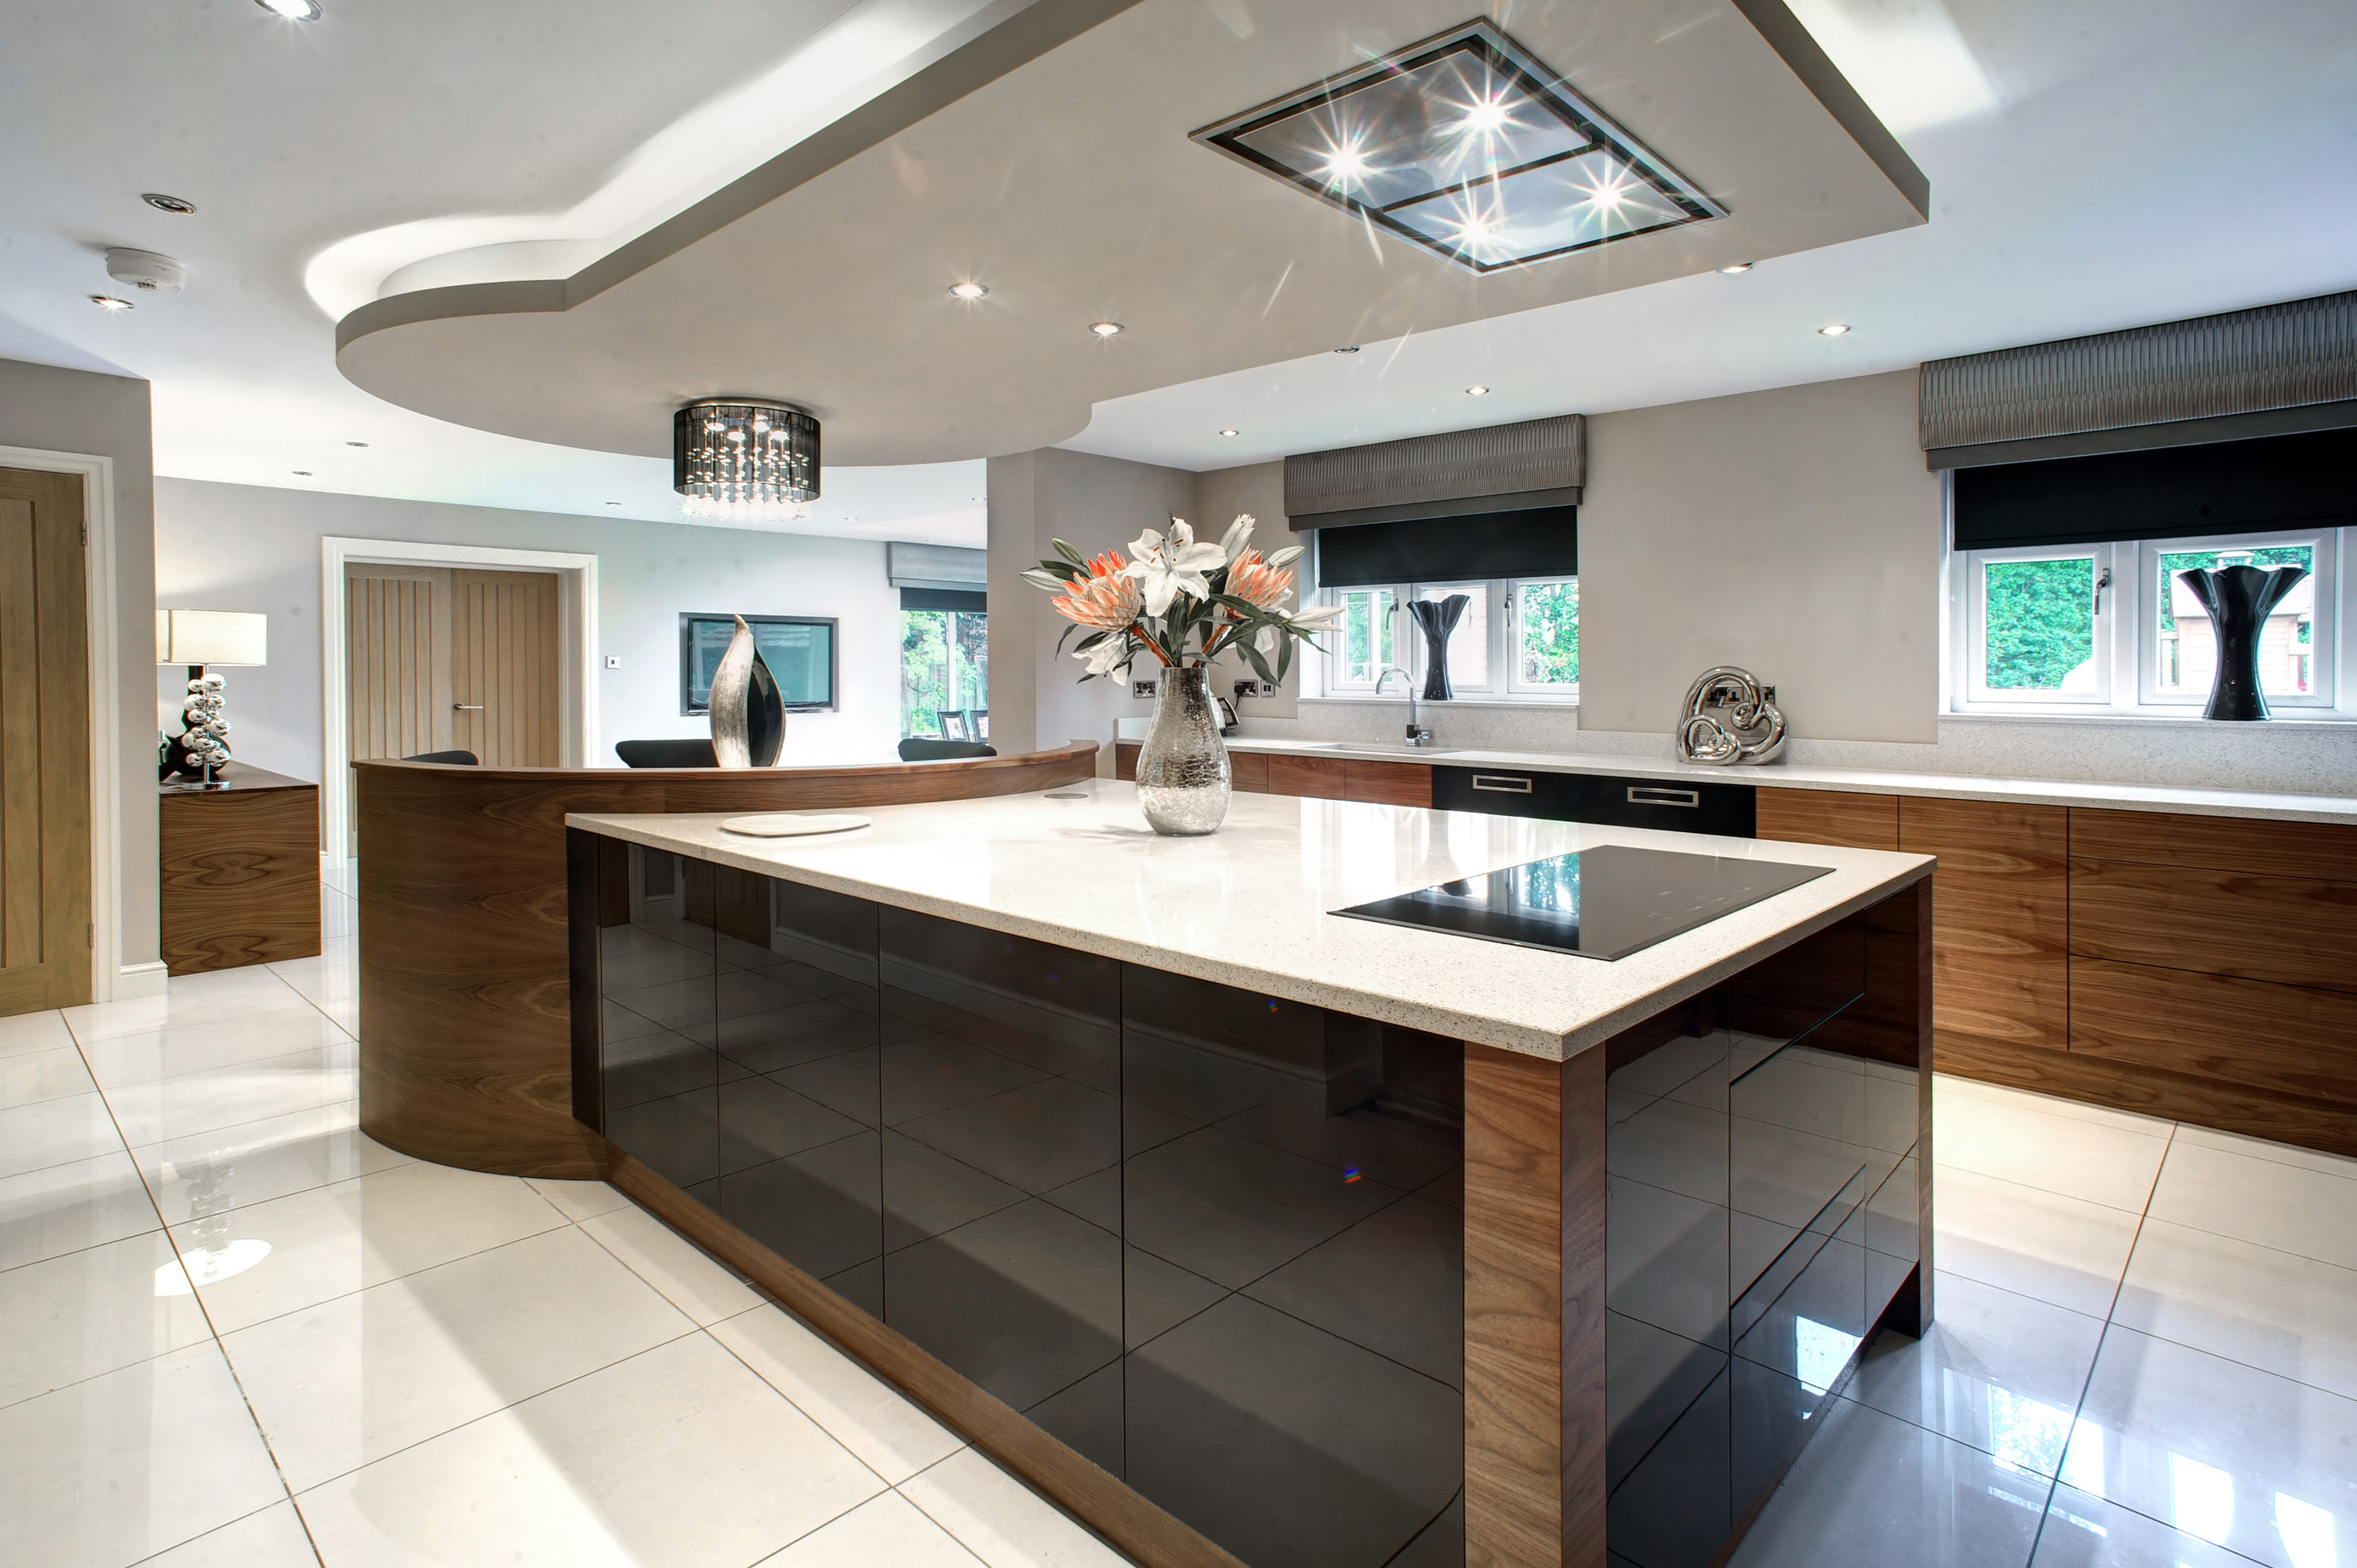 Why Are Bespoke Kitchens Famous